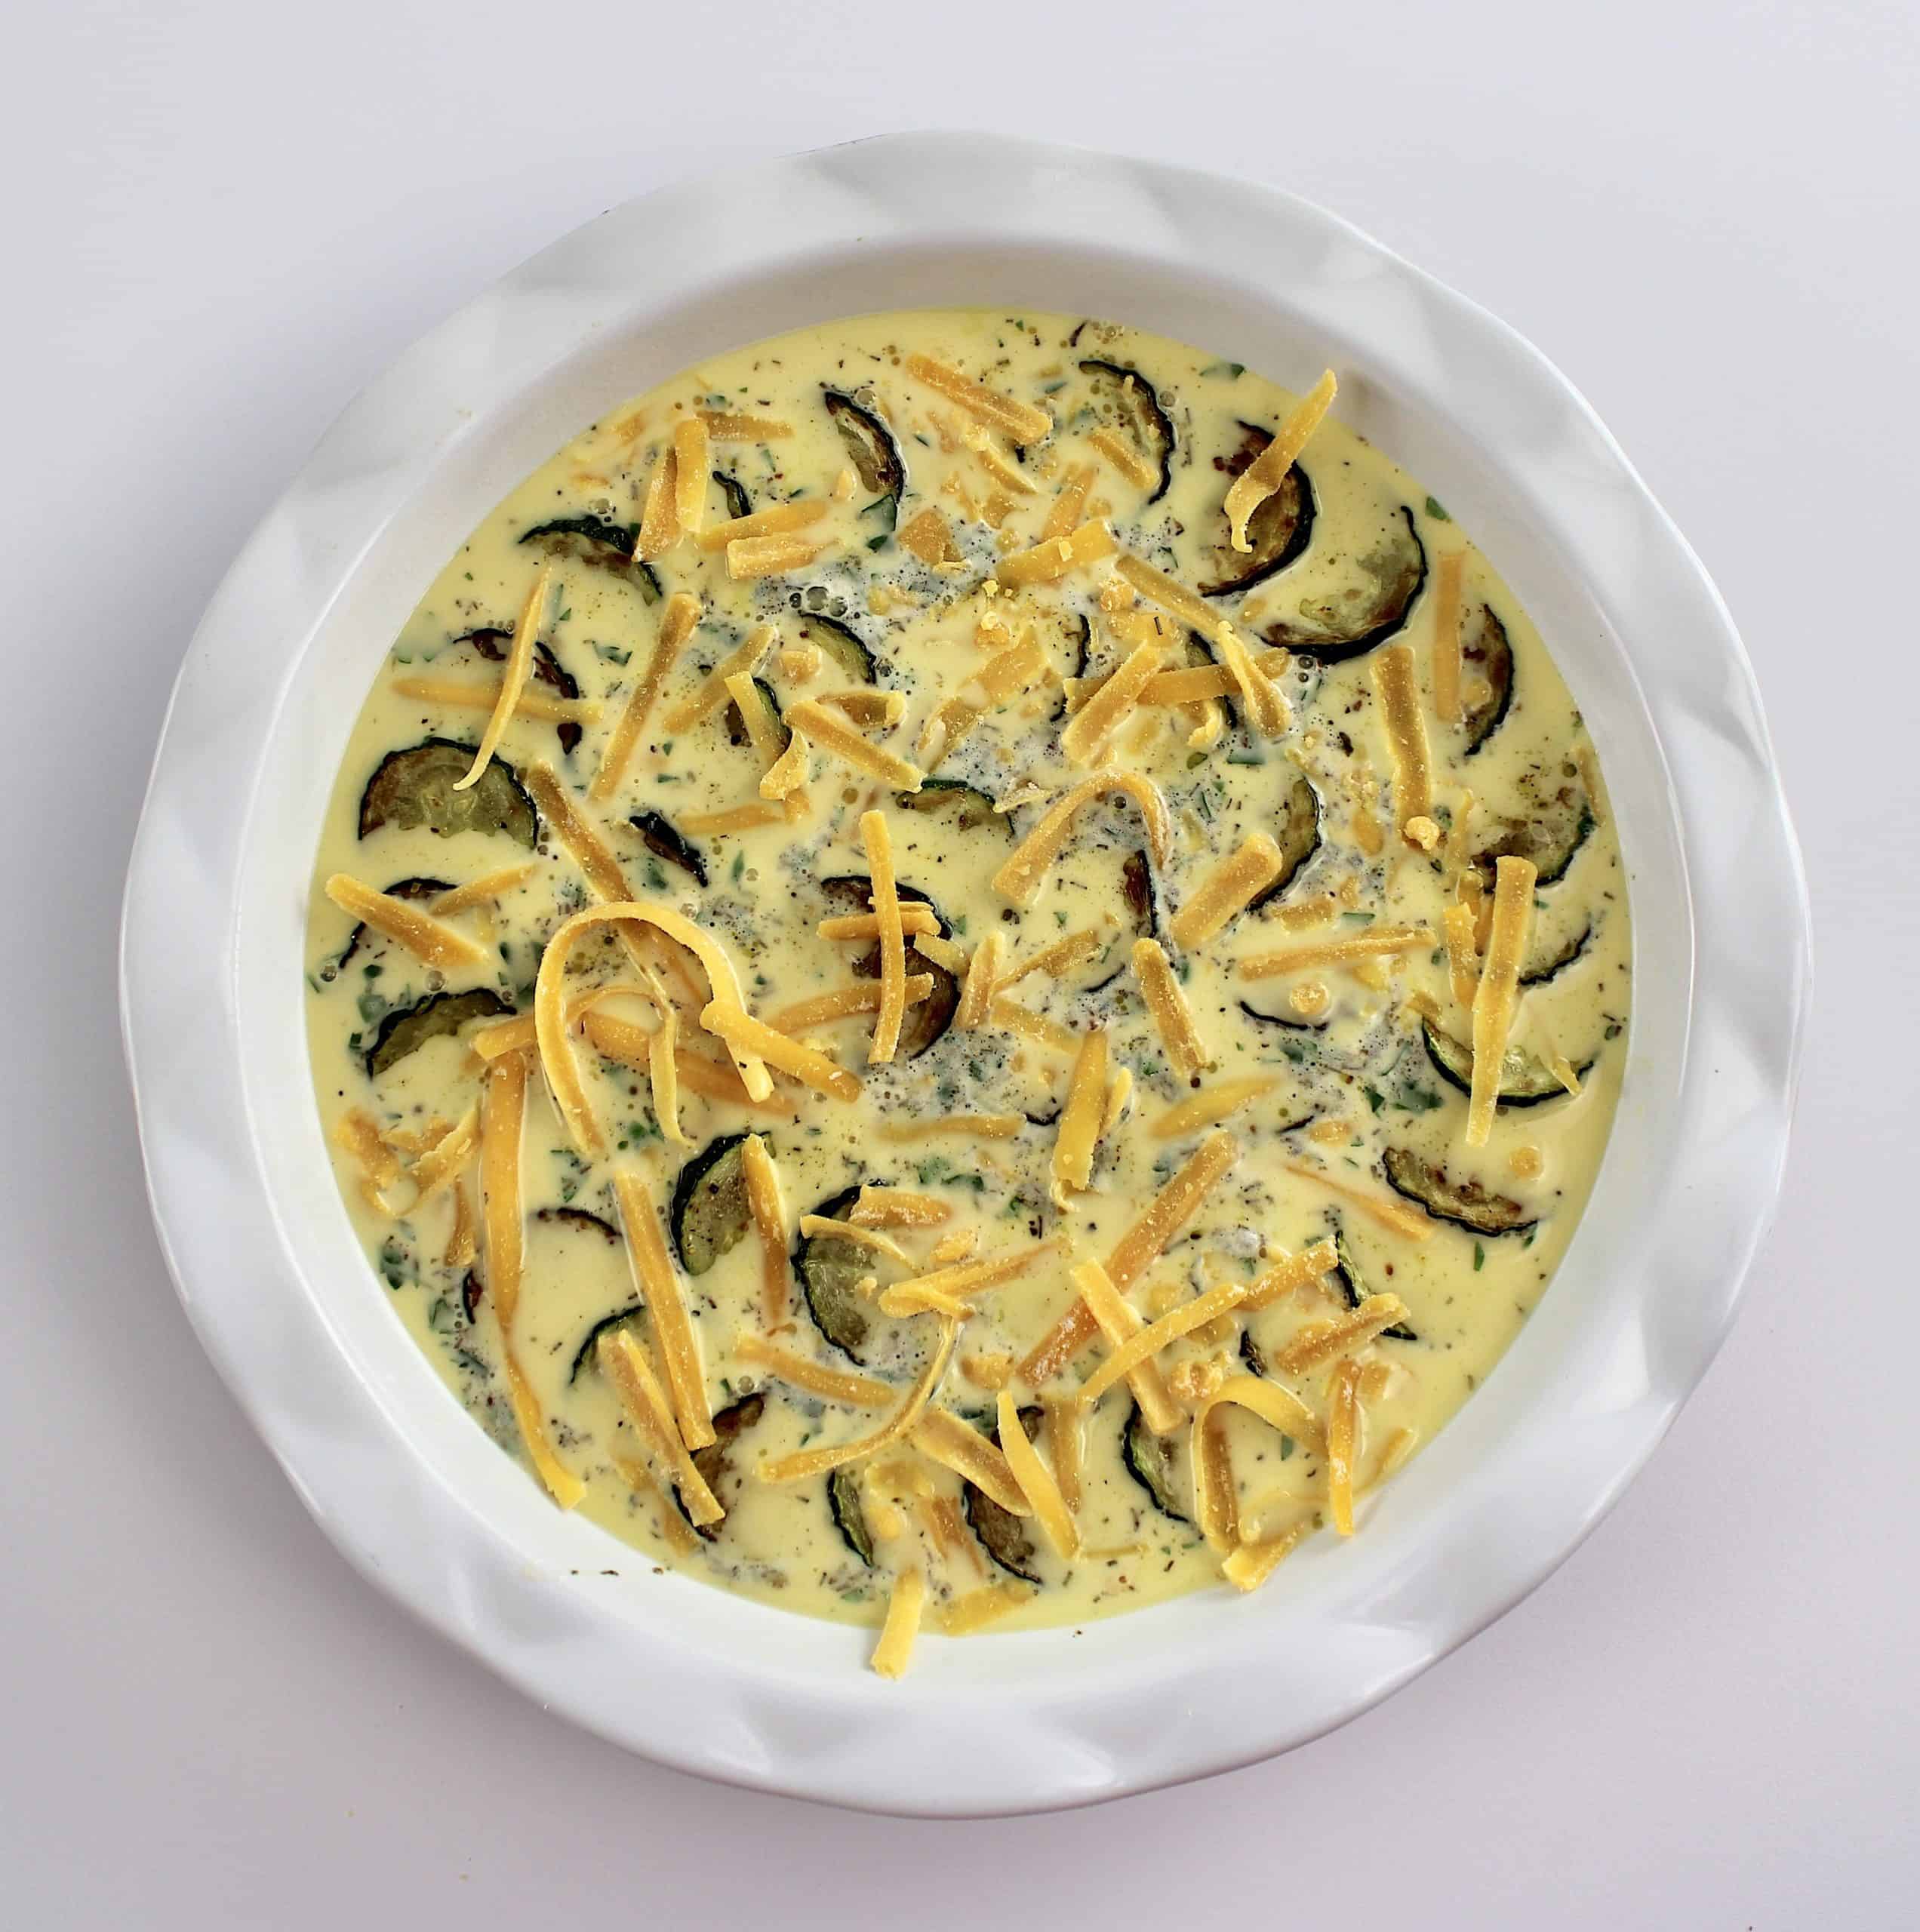 cheddar and zucchini crustless quiche in pie dish unbaked